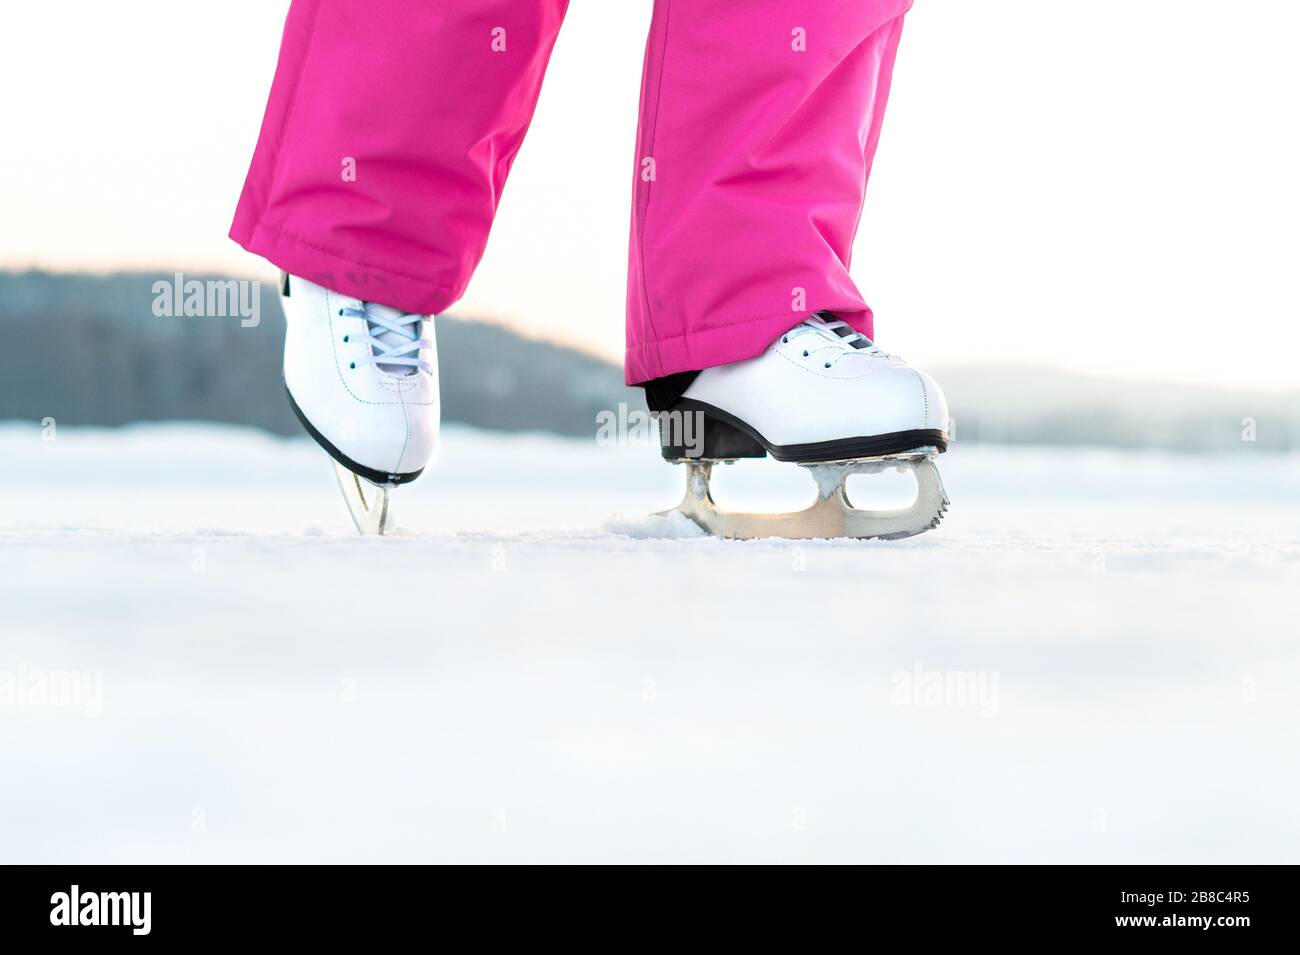 Girl skating on outdoor ice. Skater on frozen lake or pond. Young woman iceskating. Figure skating exercise or training. Fun winter activity in winter. Stock Photo